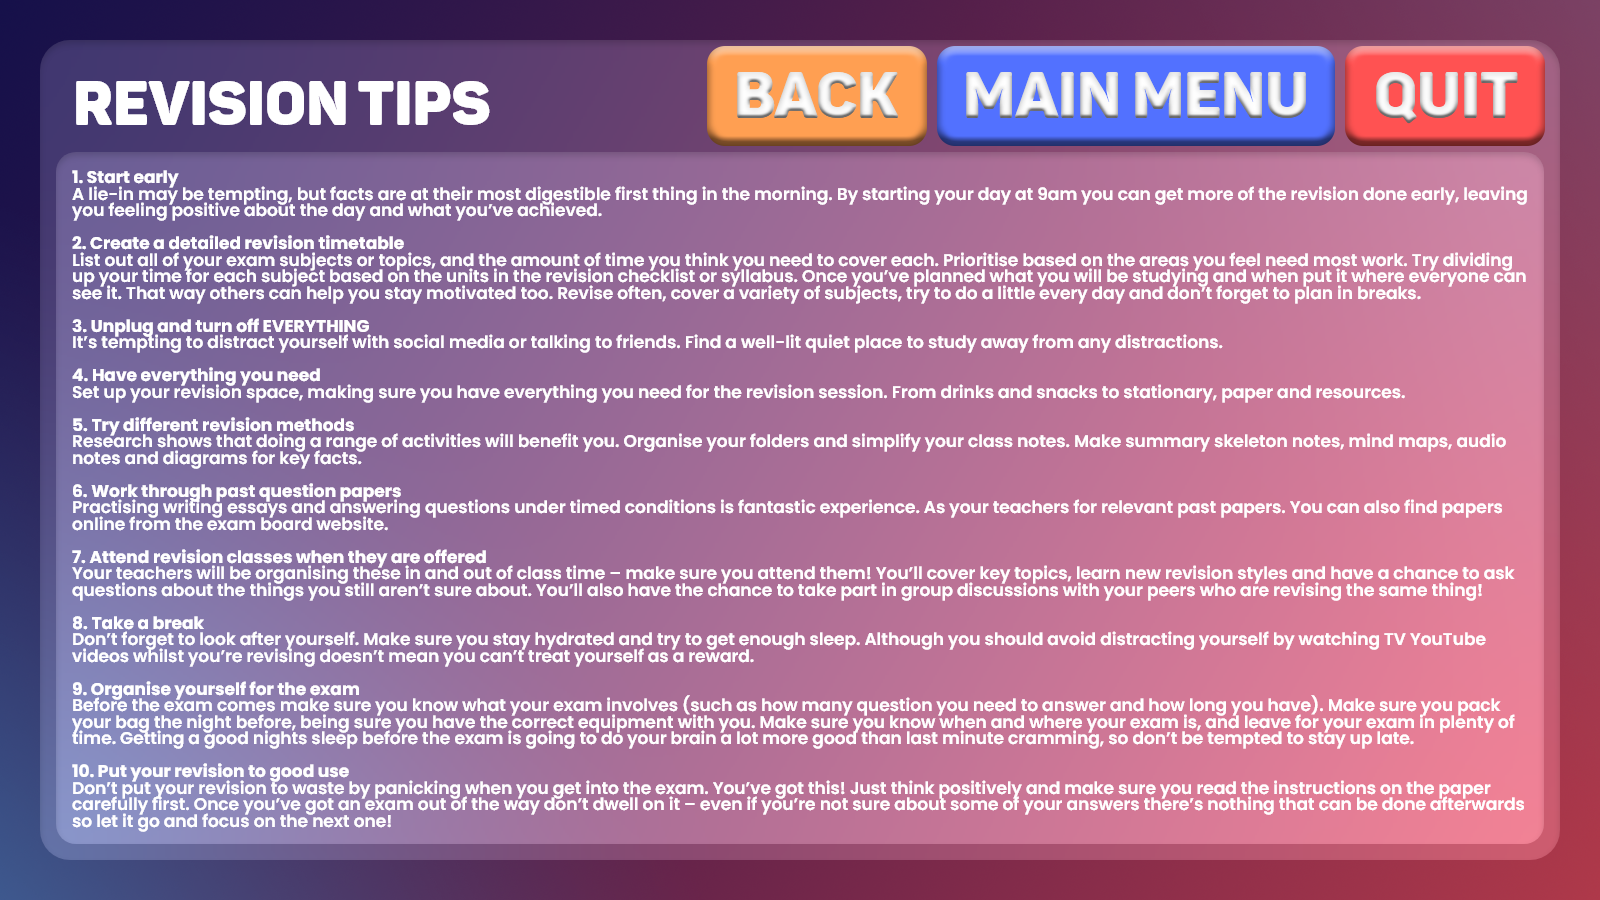 Revision Tips page